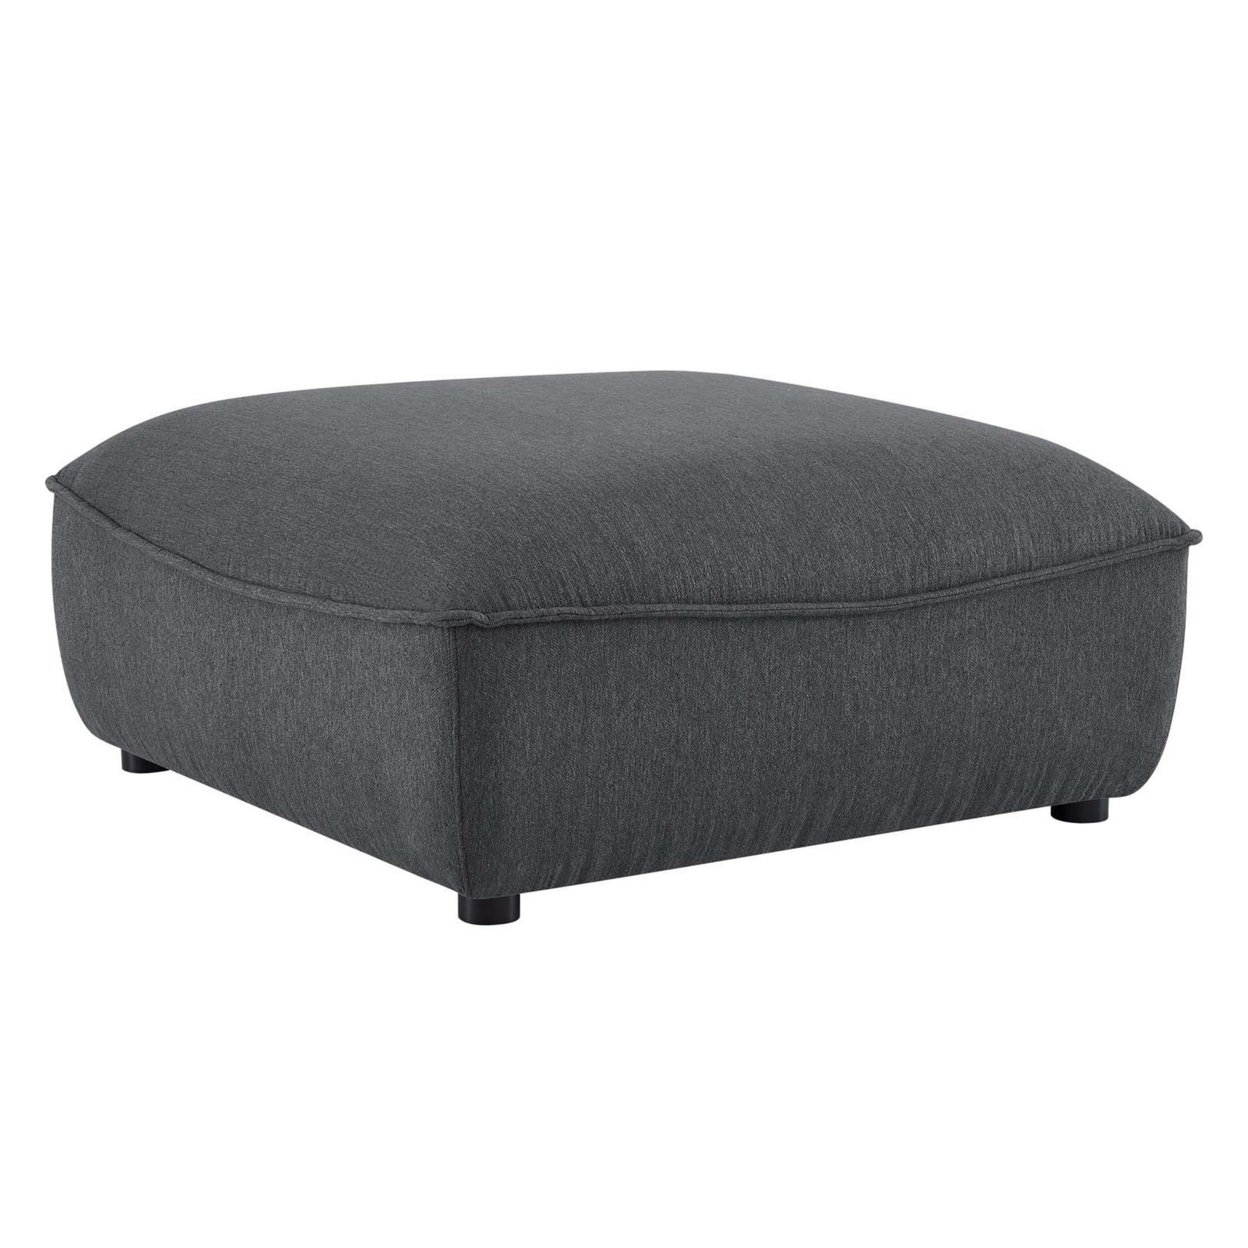 Comprise Sectional Sofa Ottoman, Charcoal